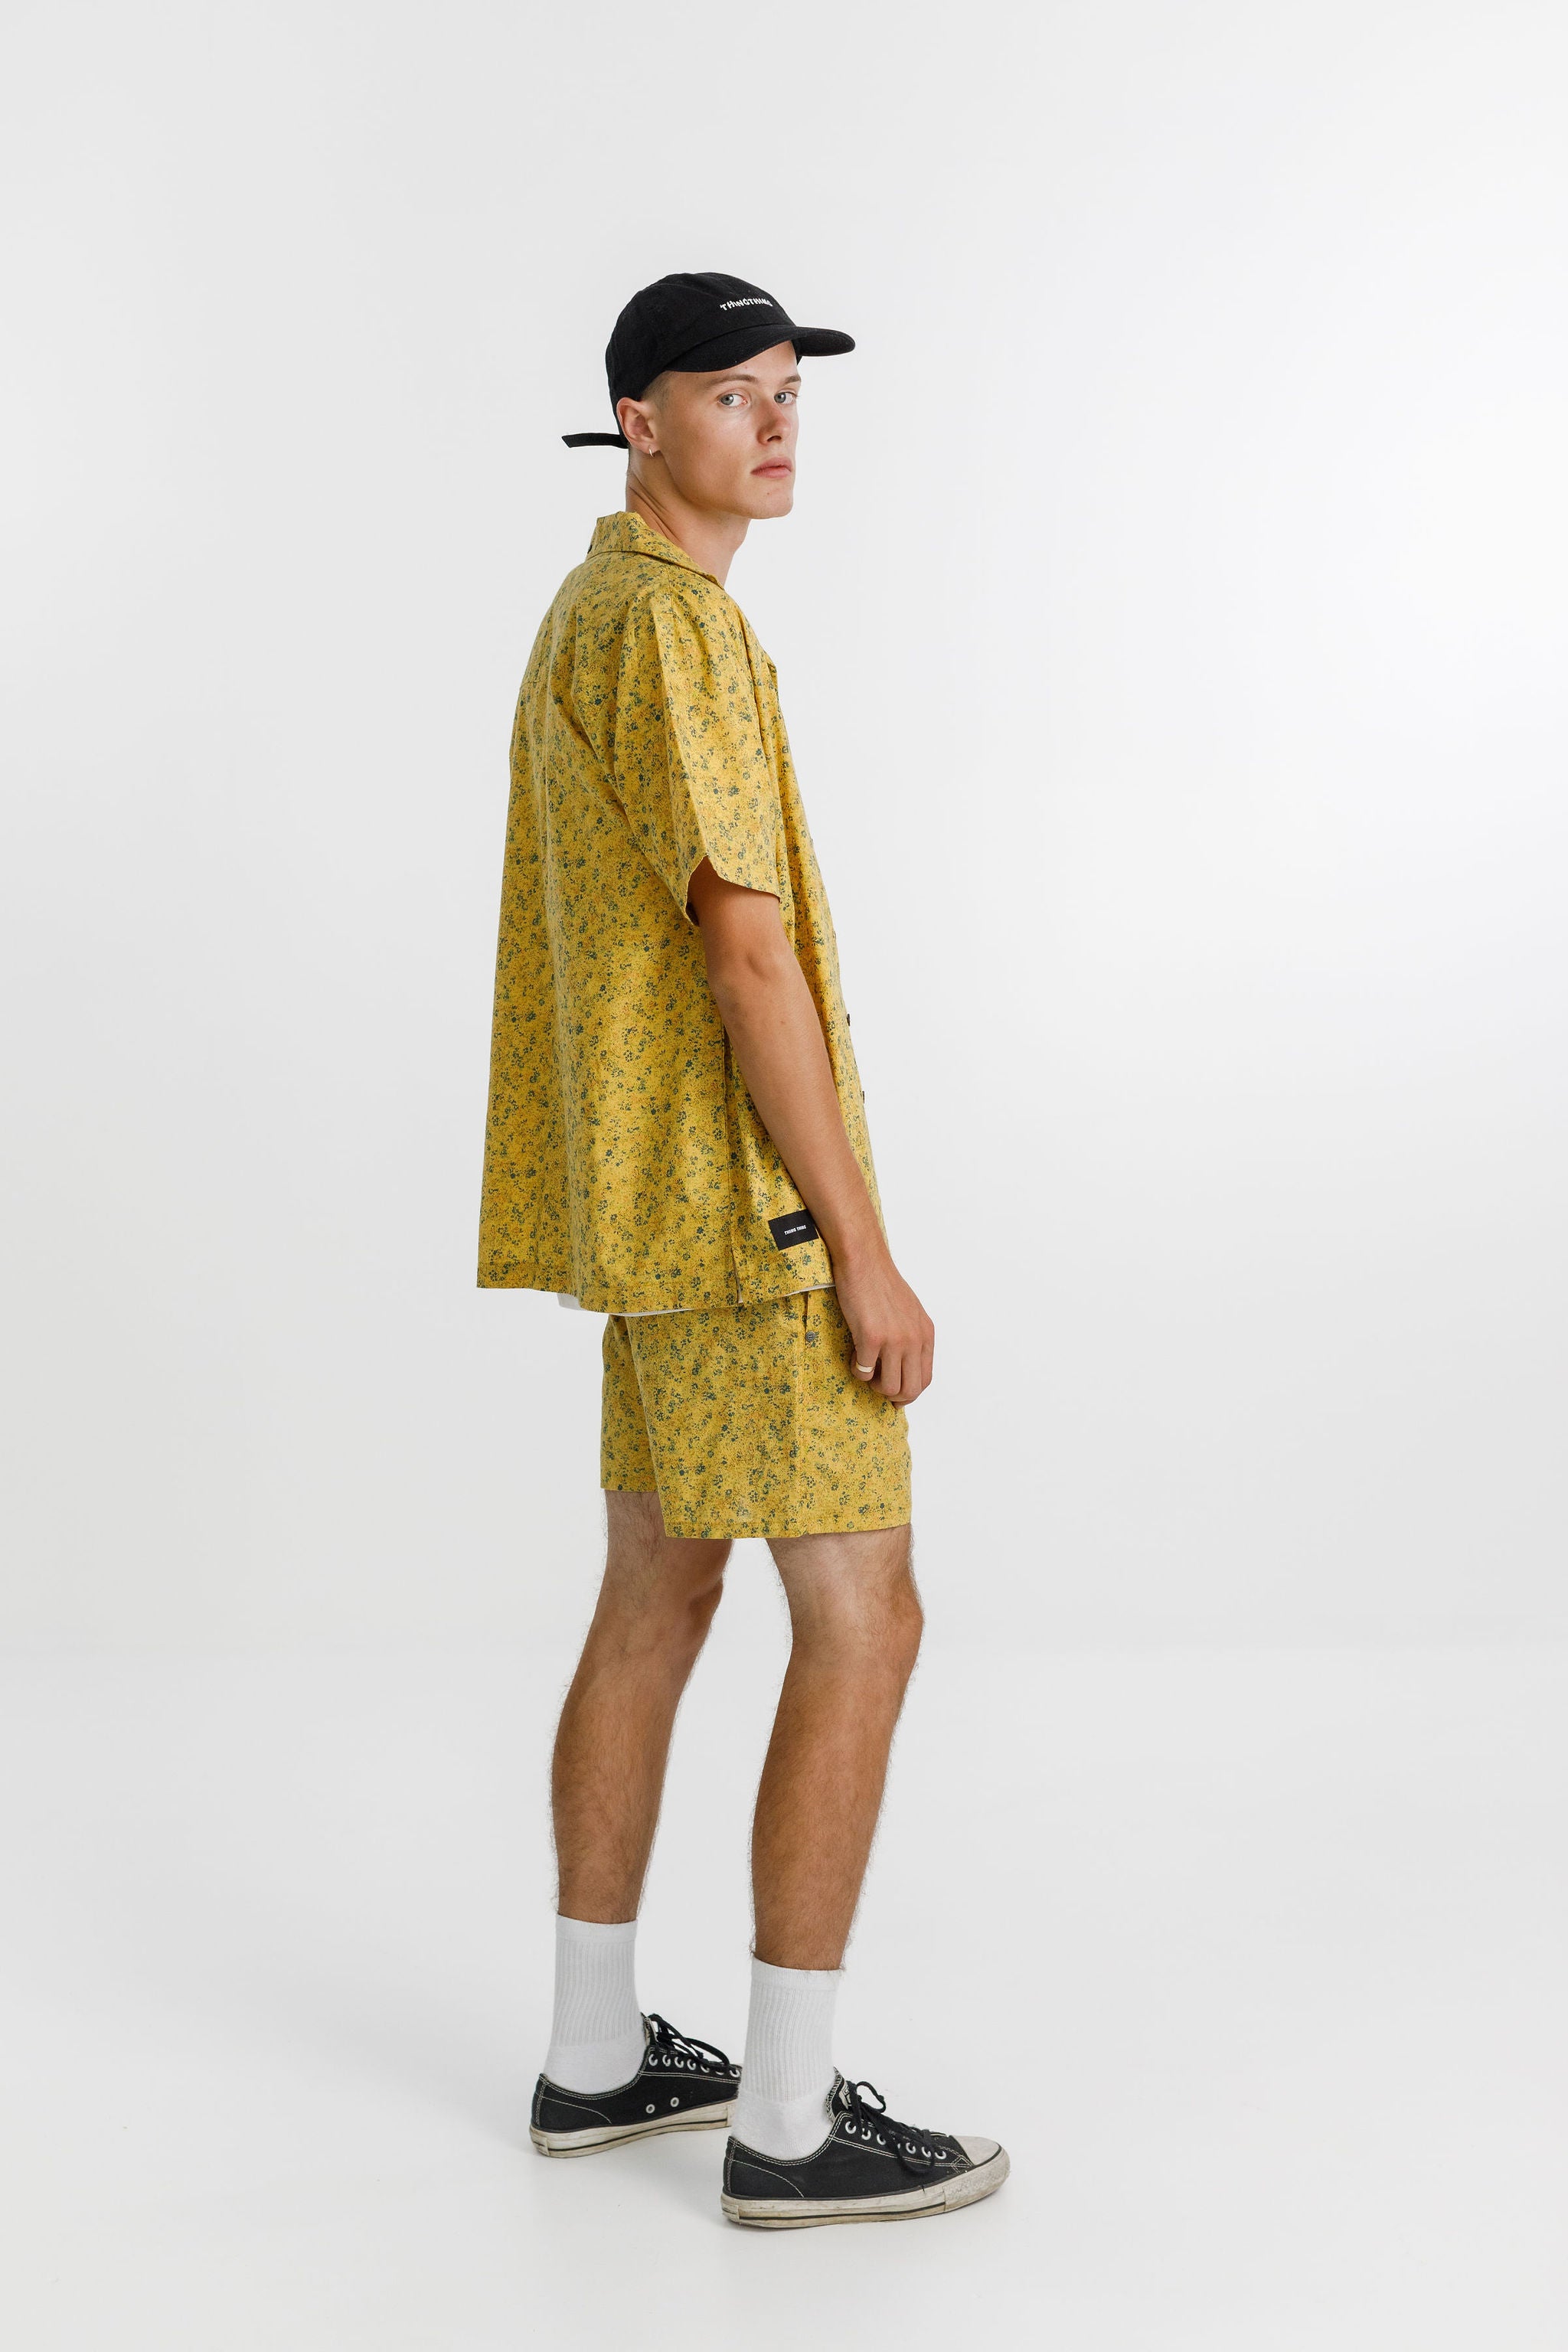 Trope Shirt - Sale - Mustard with Chest Embroidery